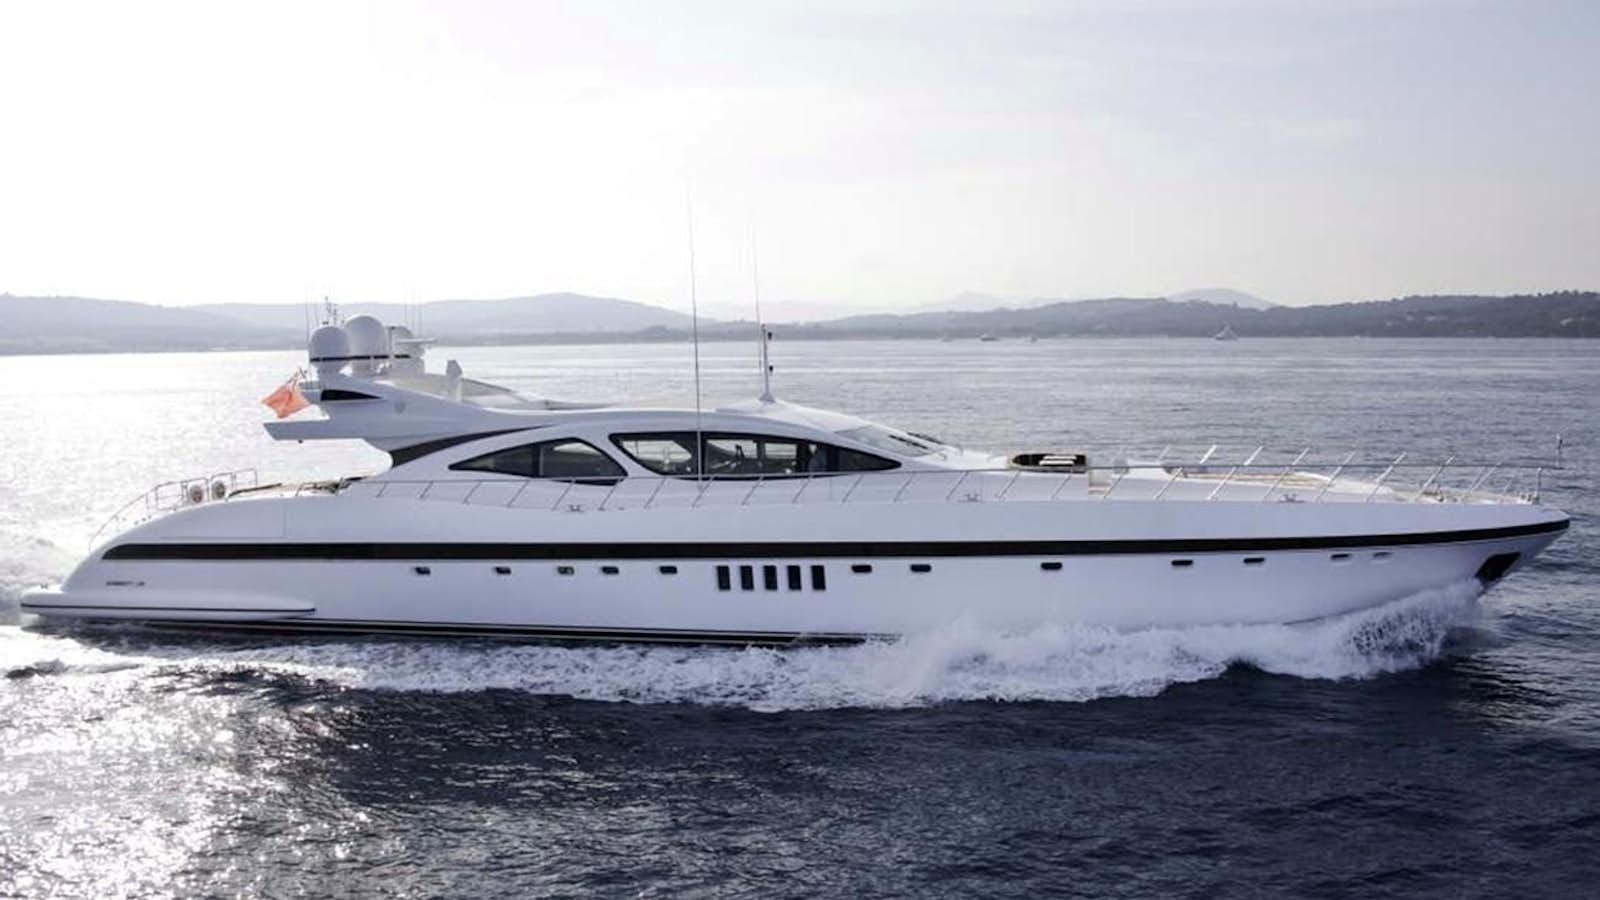 Plan a
Yacht for Sale